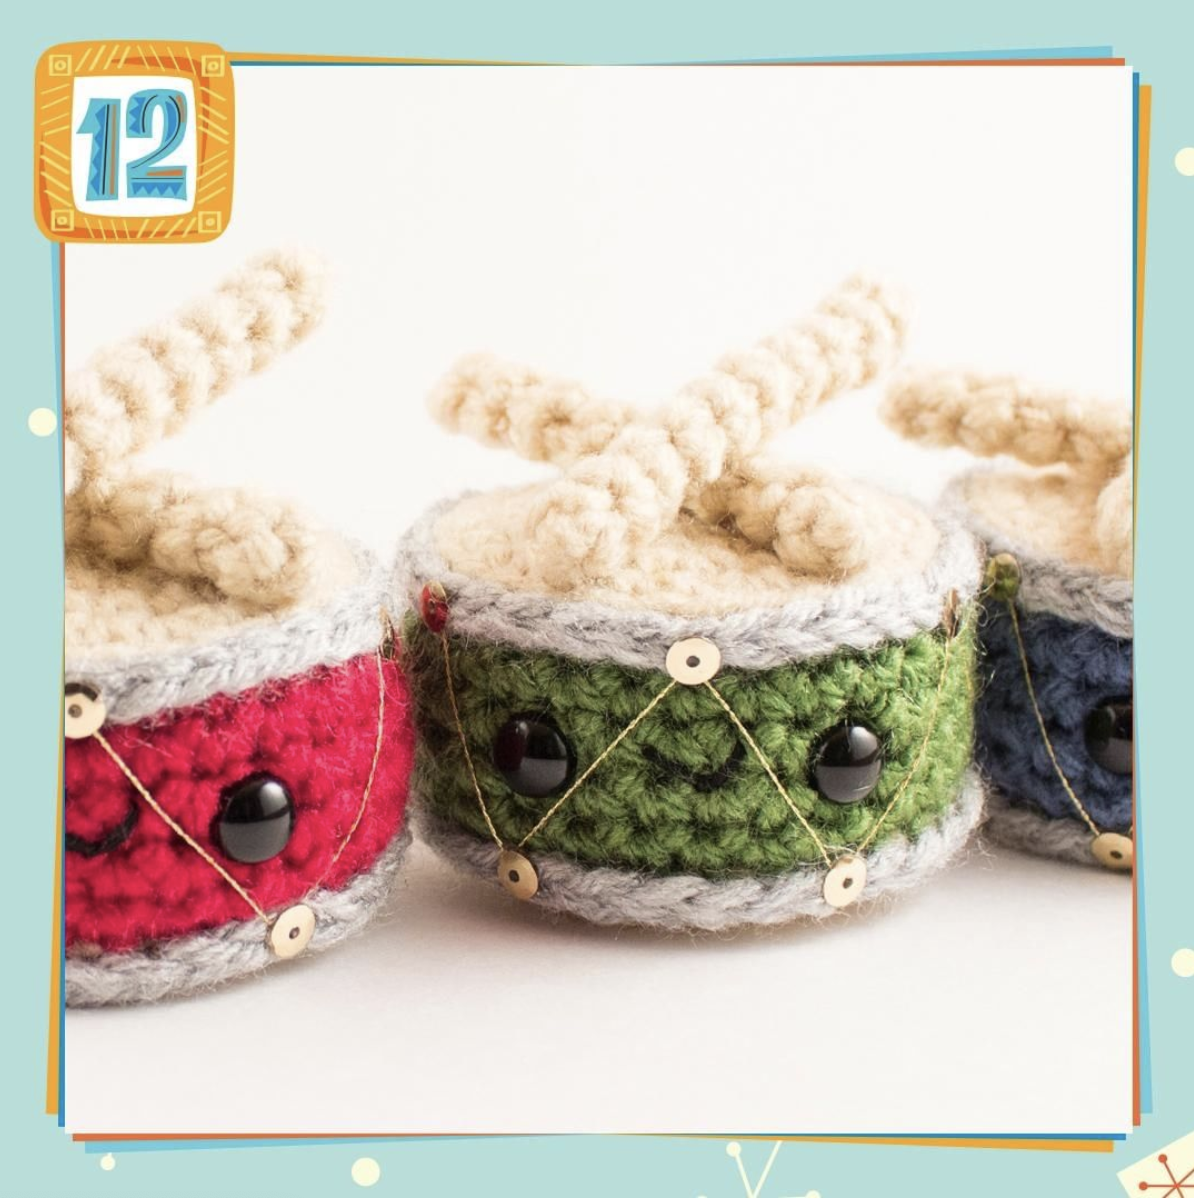 🎵On the 12th day of Christmas 🎵…@amenagerieofstitches made #DIY drummers for the #ChristmasPriceIndex. This gift cost $3,038.10 this year, but you can deck out your tree with these ornaments instead